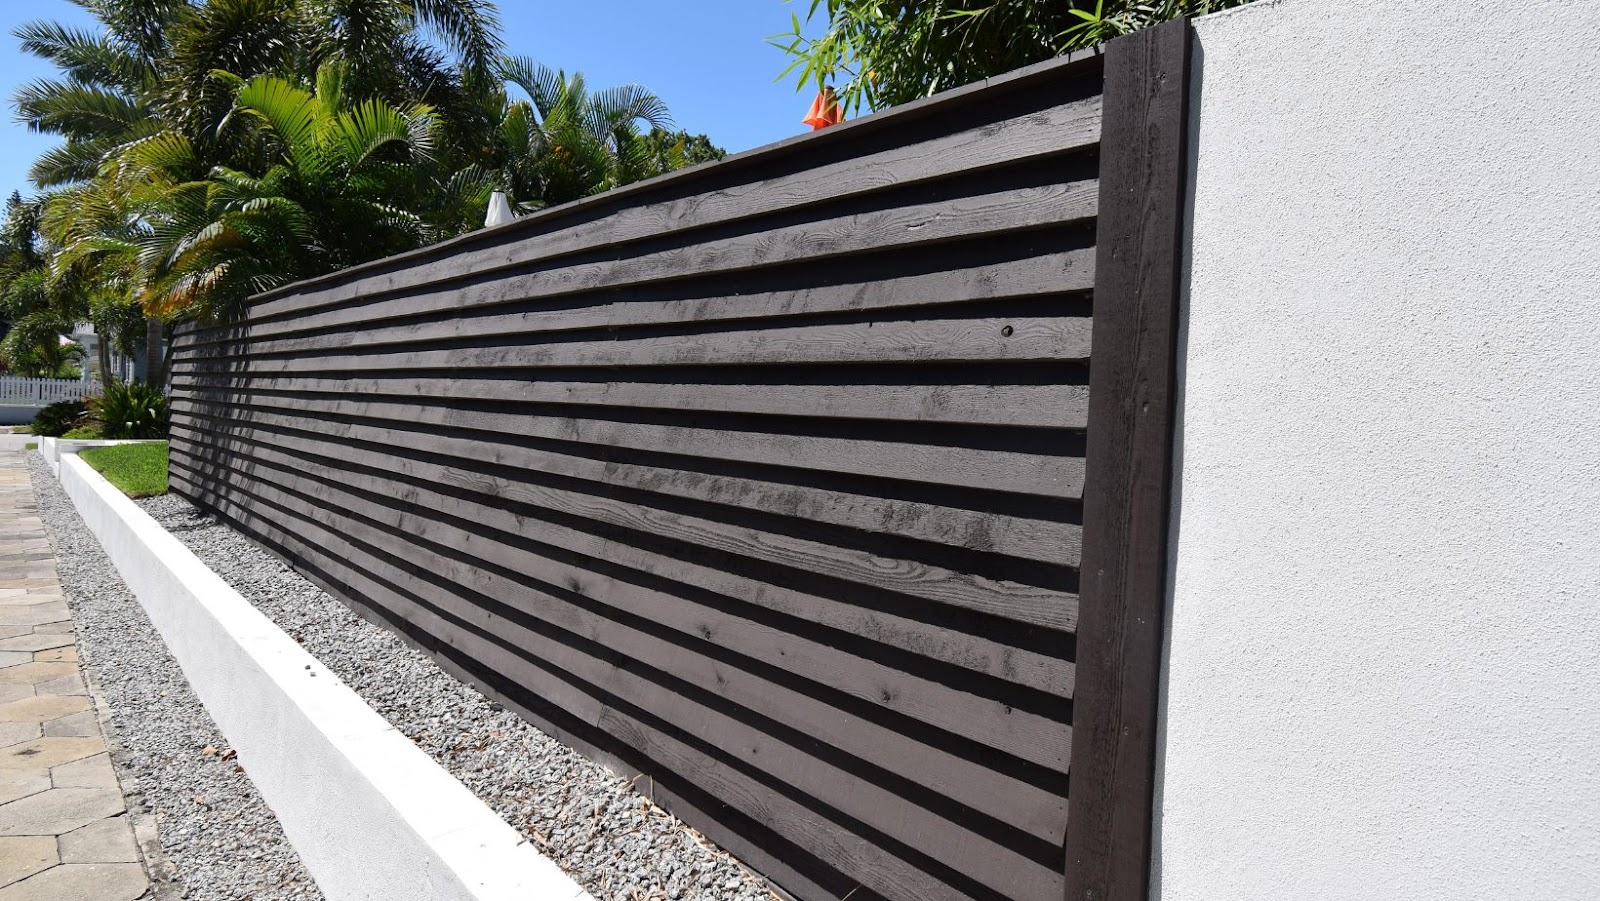 10 Tips For Choosing The Right Metal Slatwall To Fit Your Home